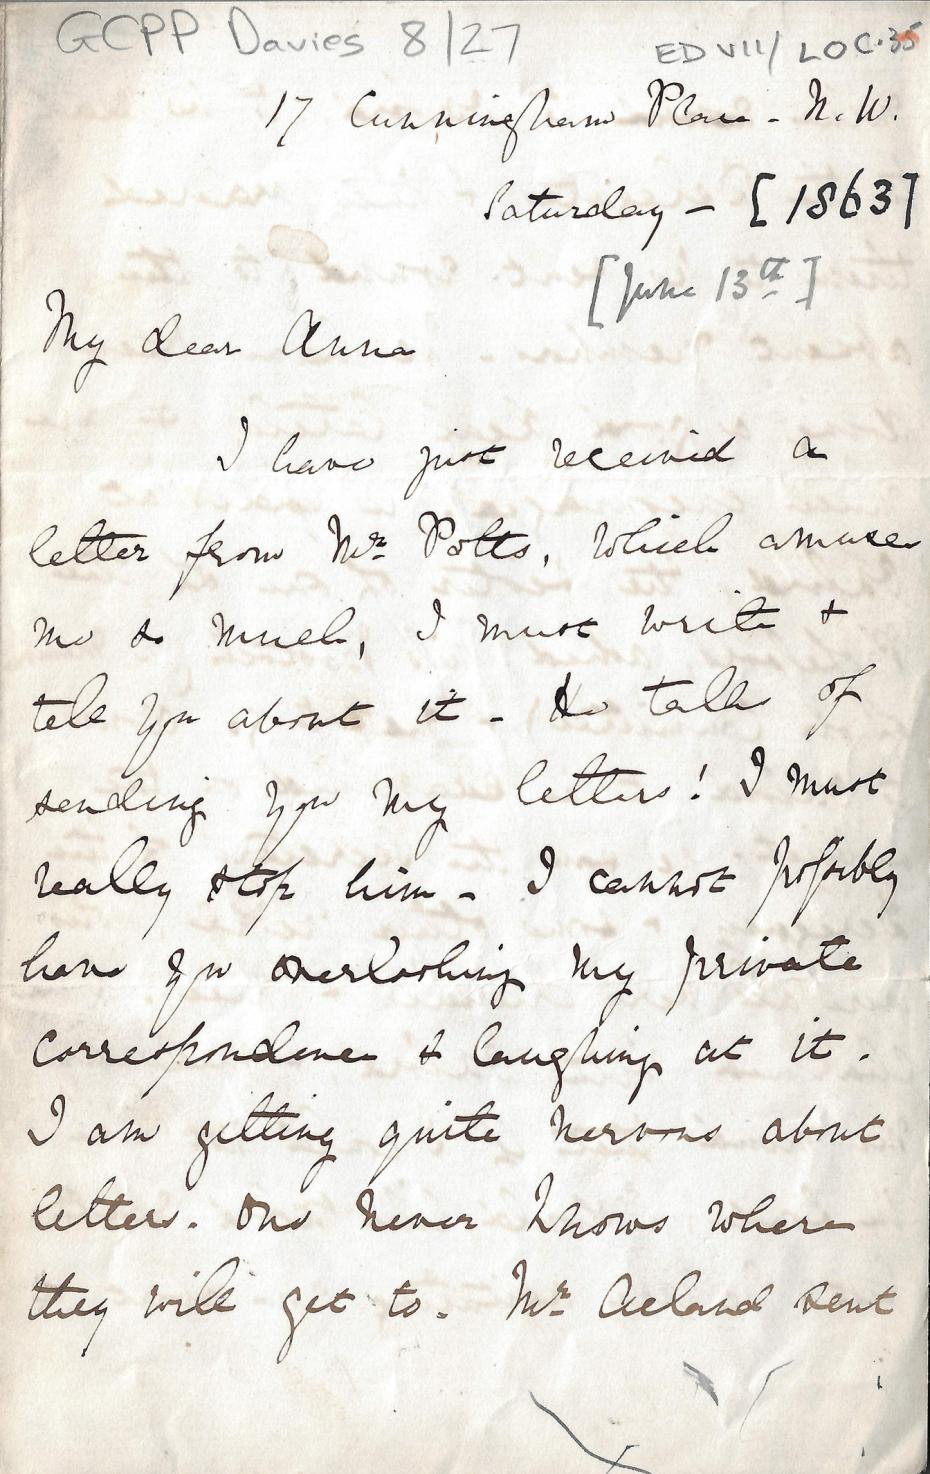 Letter from Emily Davies to Anna Richardson, 13 June 1863 (archive reference: GCPP Davies 8/27pt). 